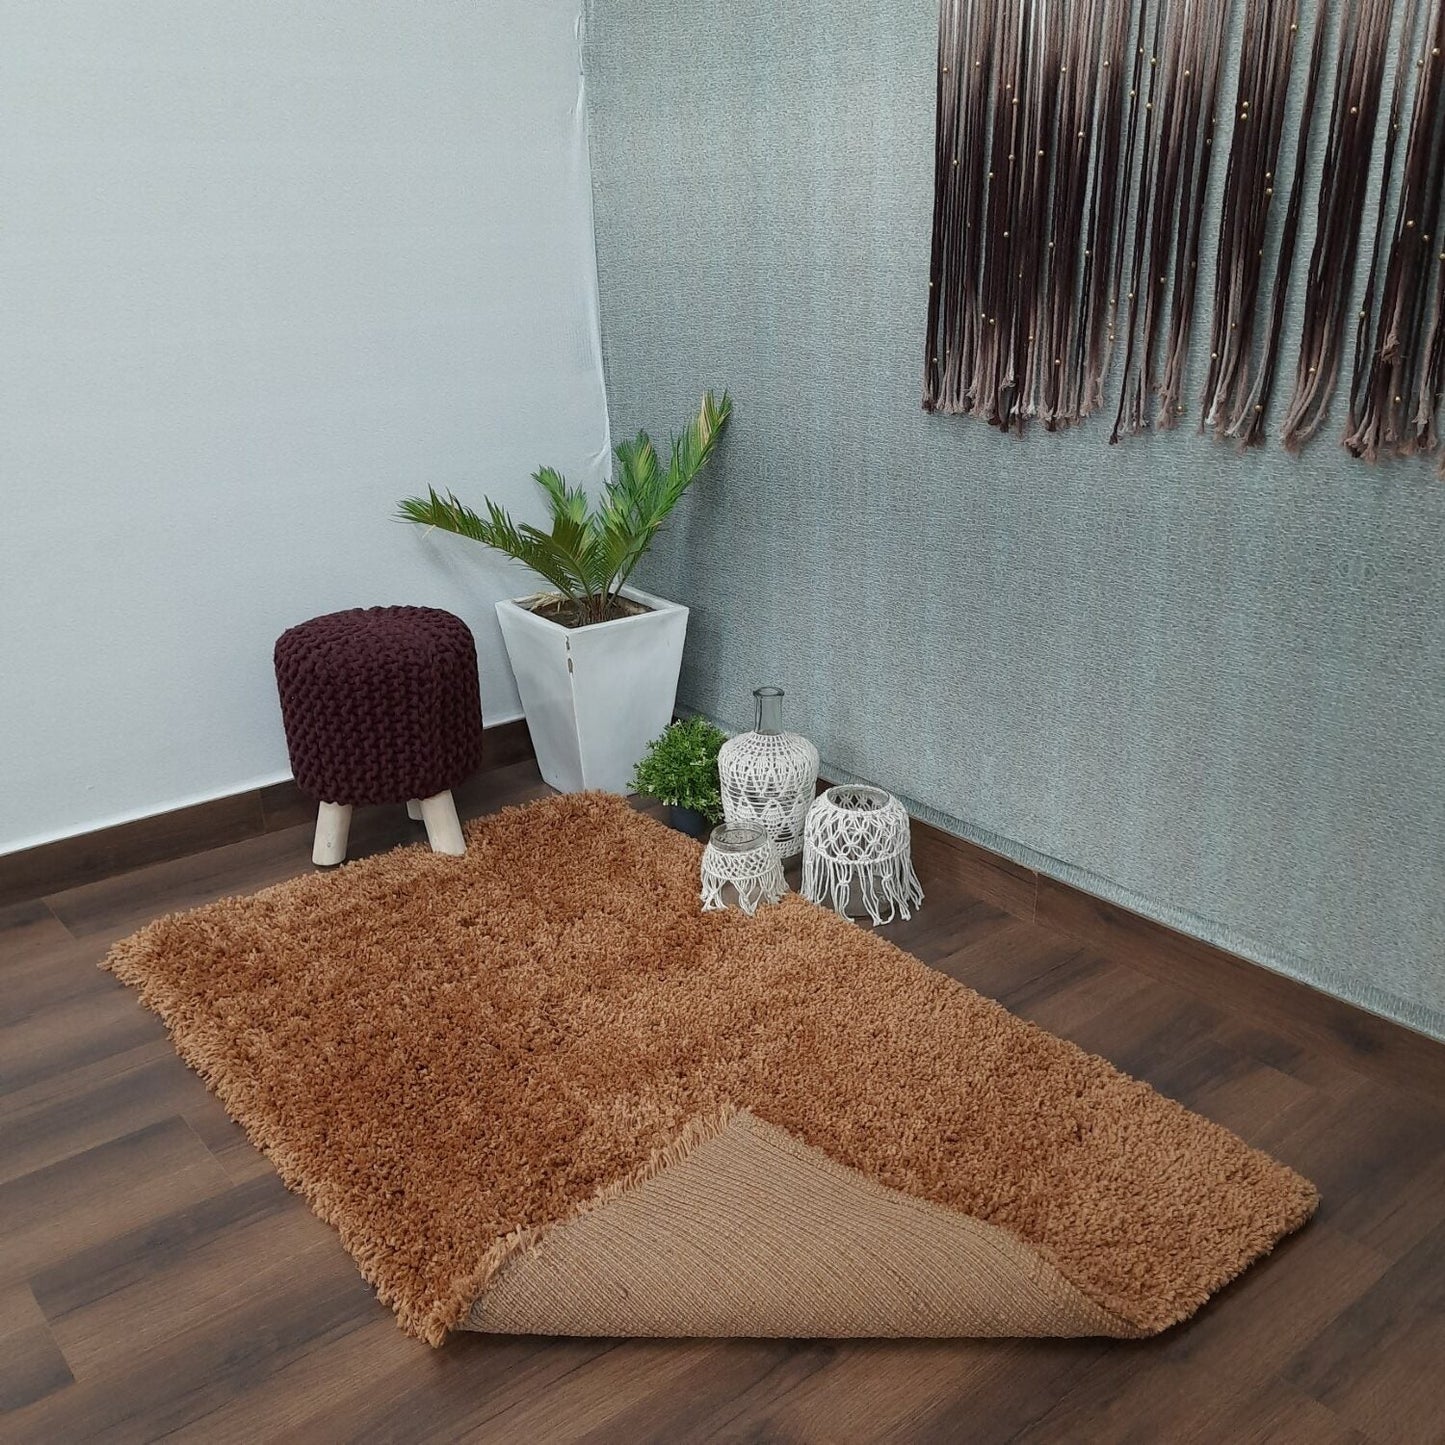 Shaggy Carpet | Washable | Hand Woven Super Luxurious Feel | Export Quality- Camel/Brown Color